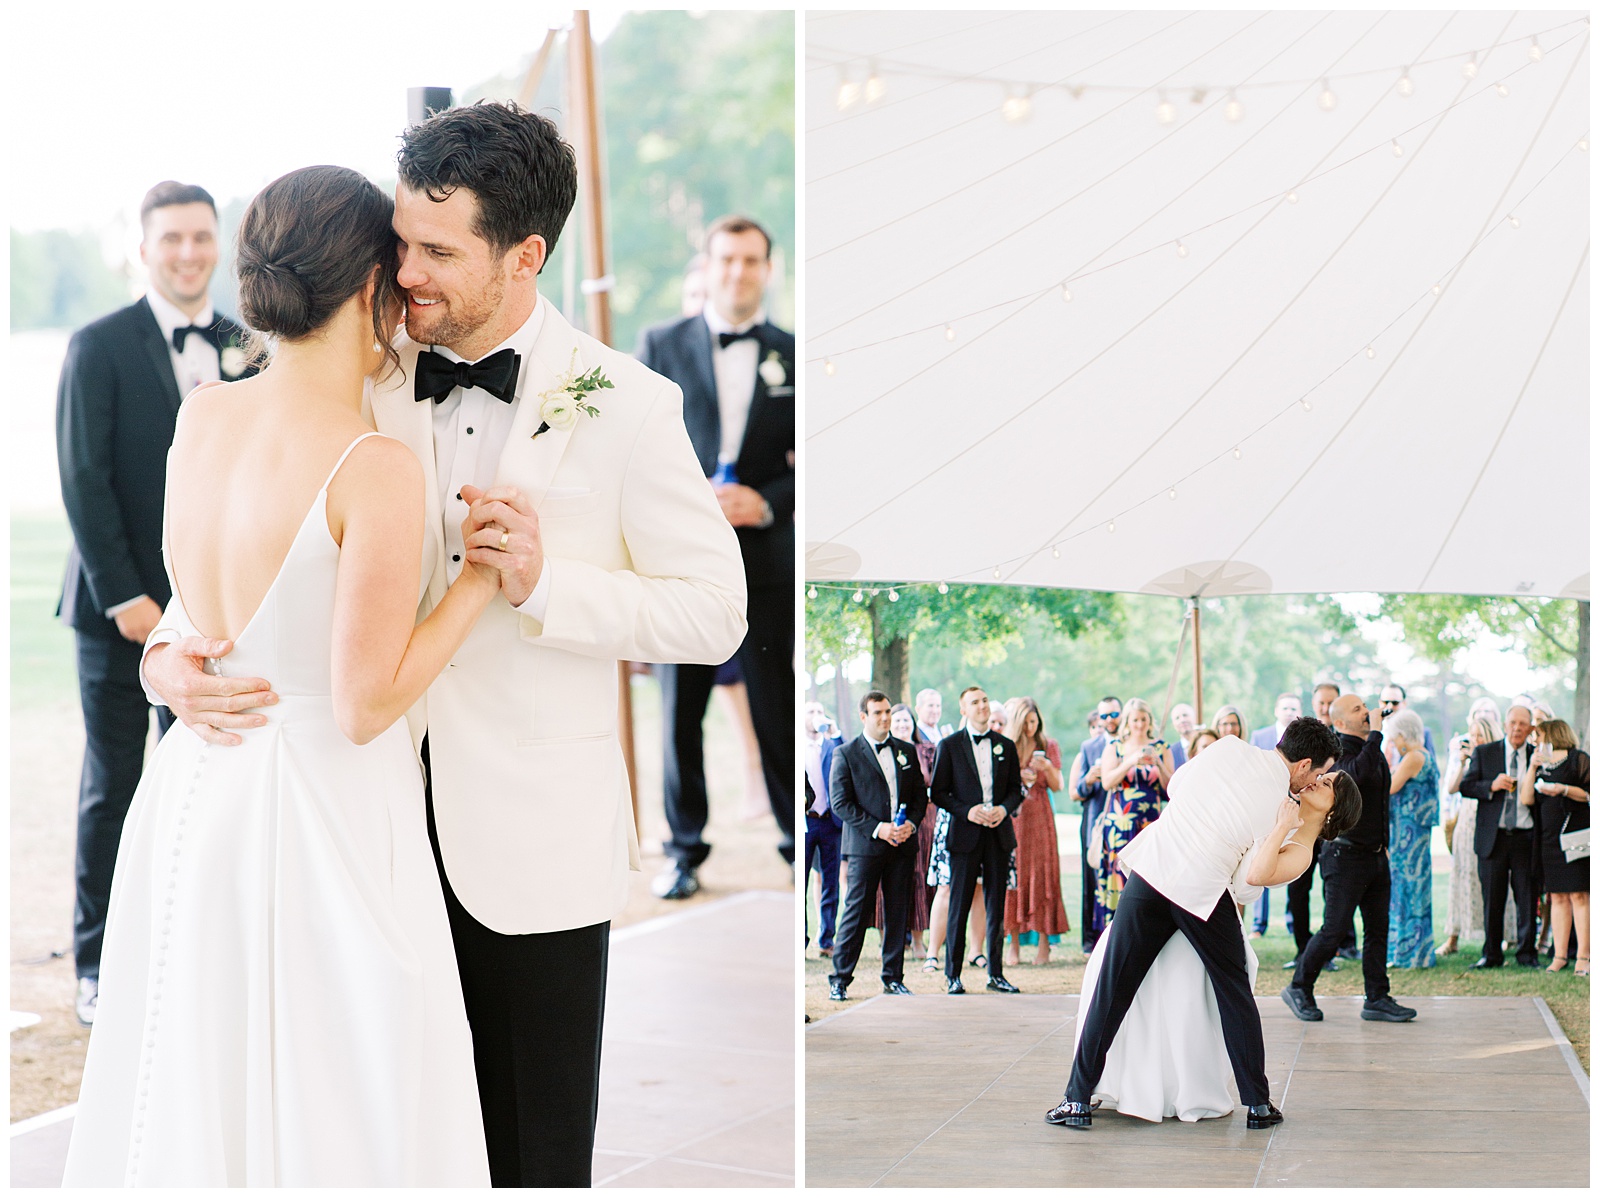 newlyweds dance under tent at wedding reception in Charlotte NC 